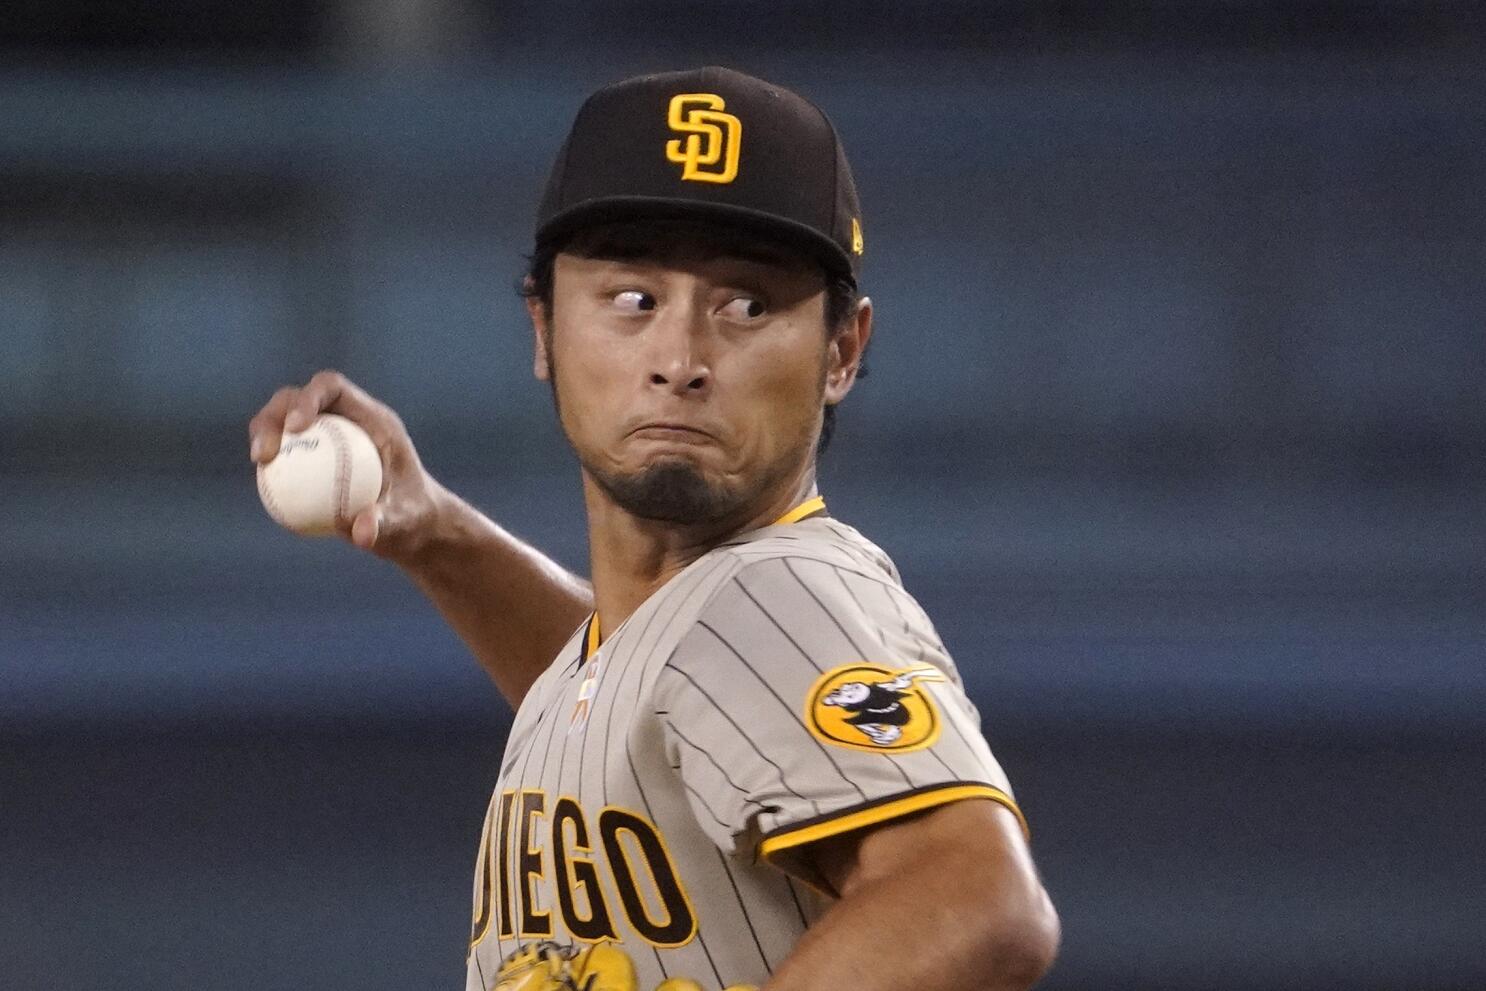 Yu Darvish explains family reasons behind Dodgers exit